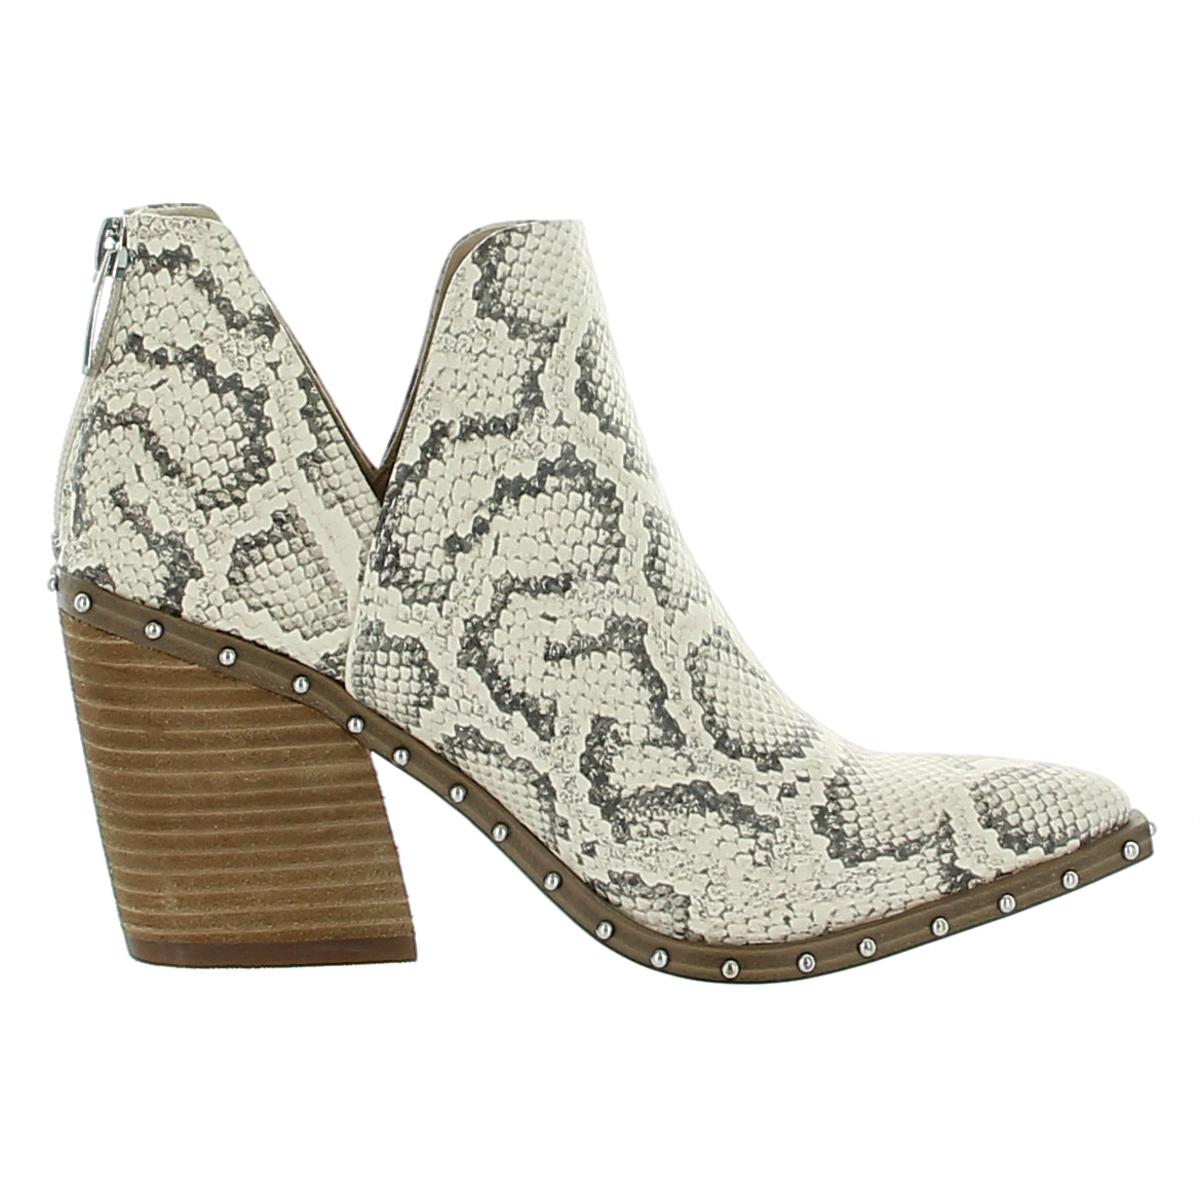 Steve Madden Womens Alyse Heeled Booties Ankle Boots Shoes BHFO 2501 